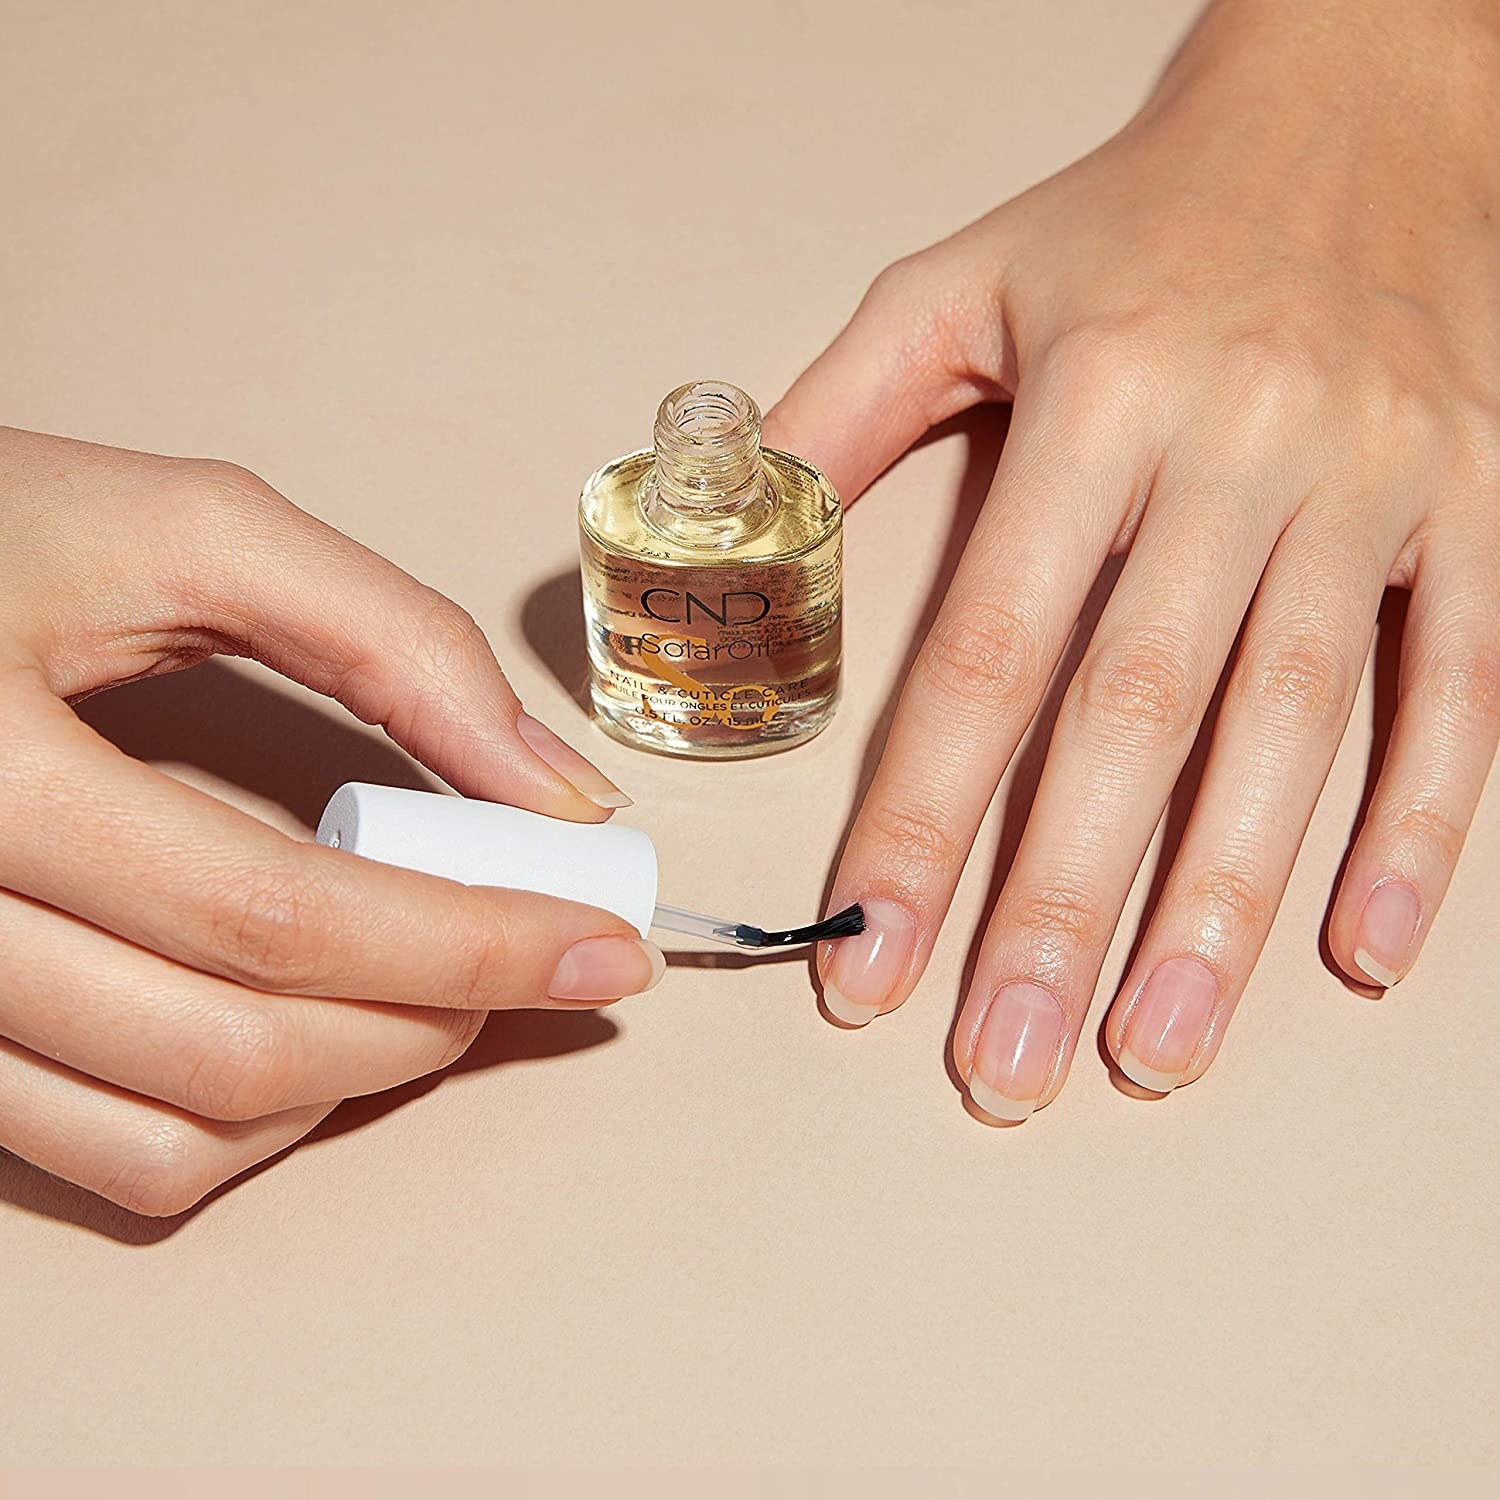 A person applying the oil to their cuticles